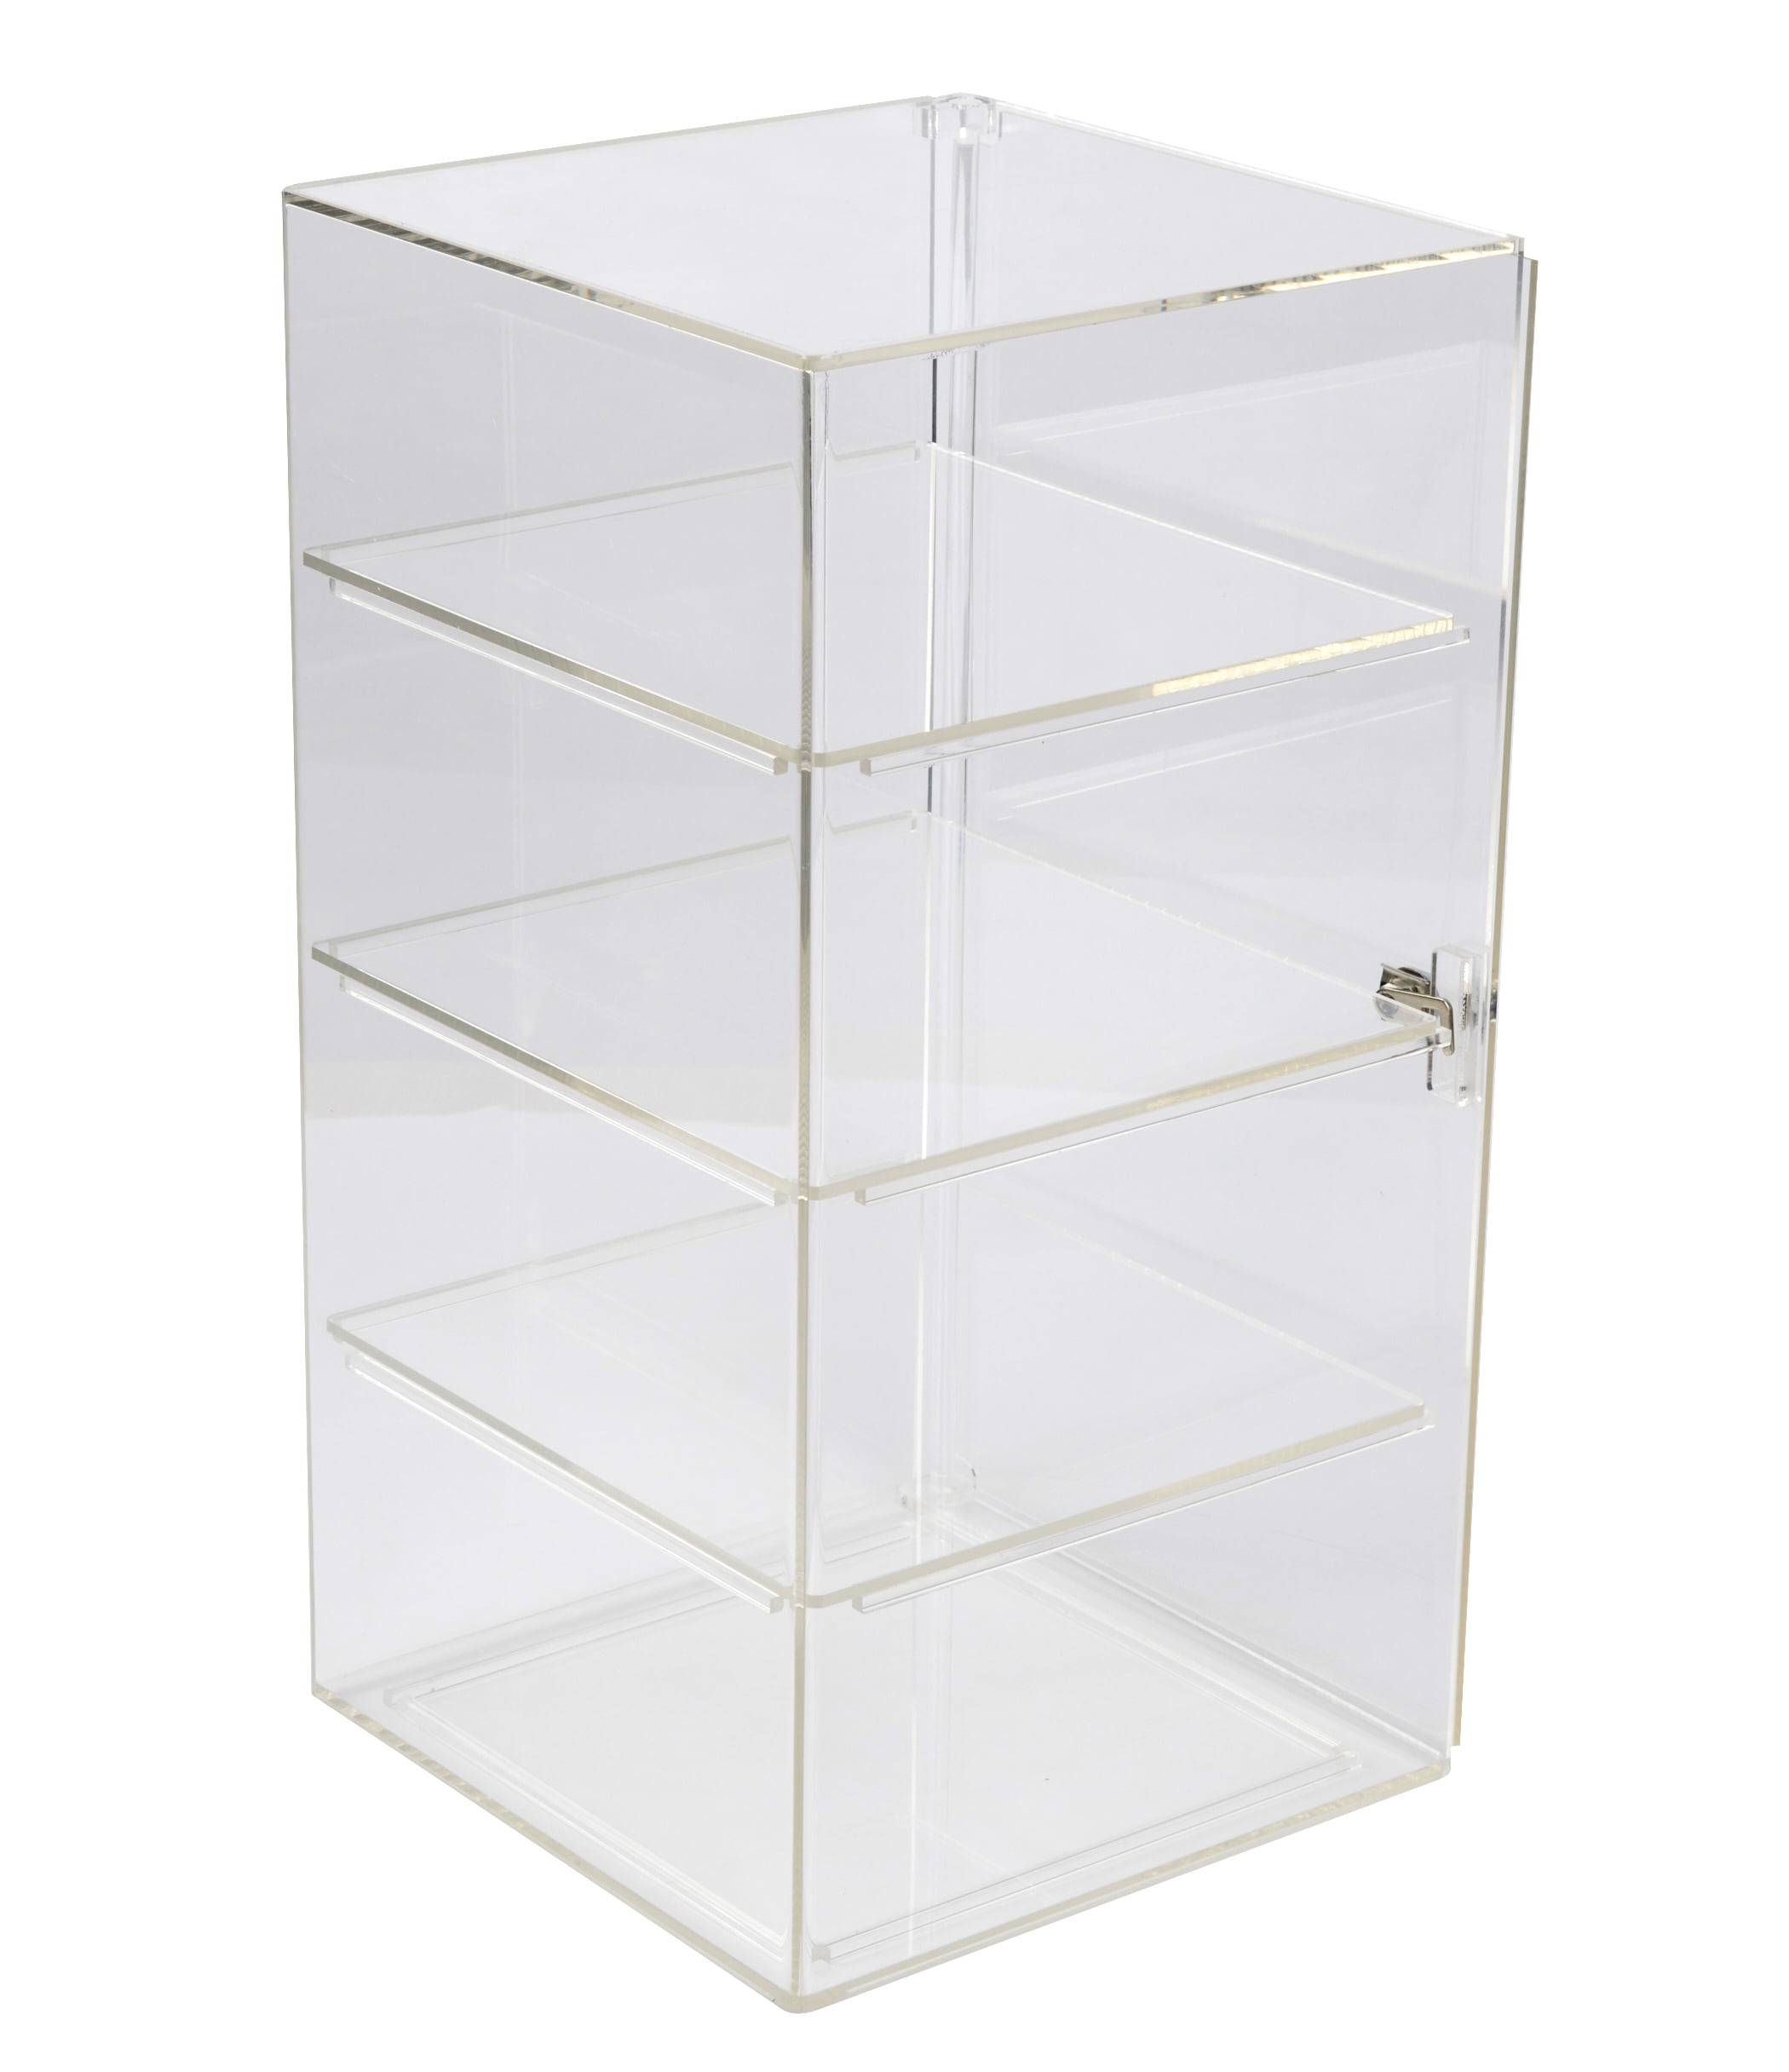 Pin Display Case - Pin Collection Display with real Glass Door for